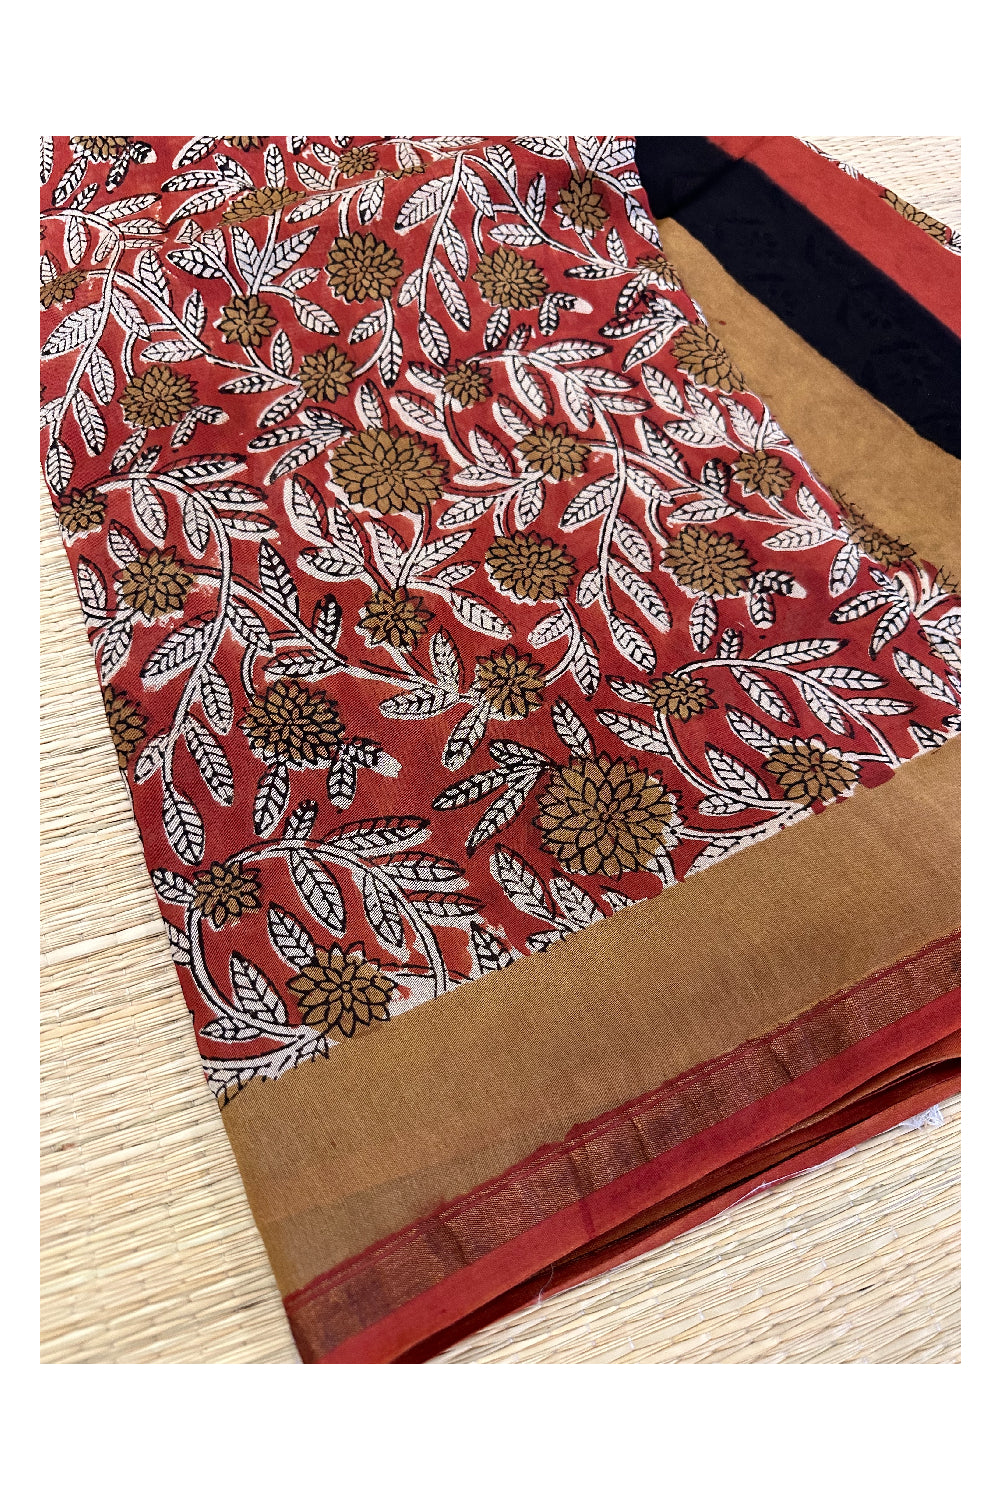 Southloom Chanderi Saree with Jaipur Hand Block Prints Across Body (Printed Blouse)